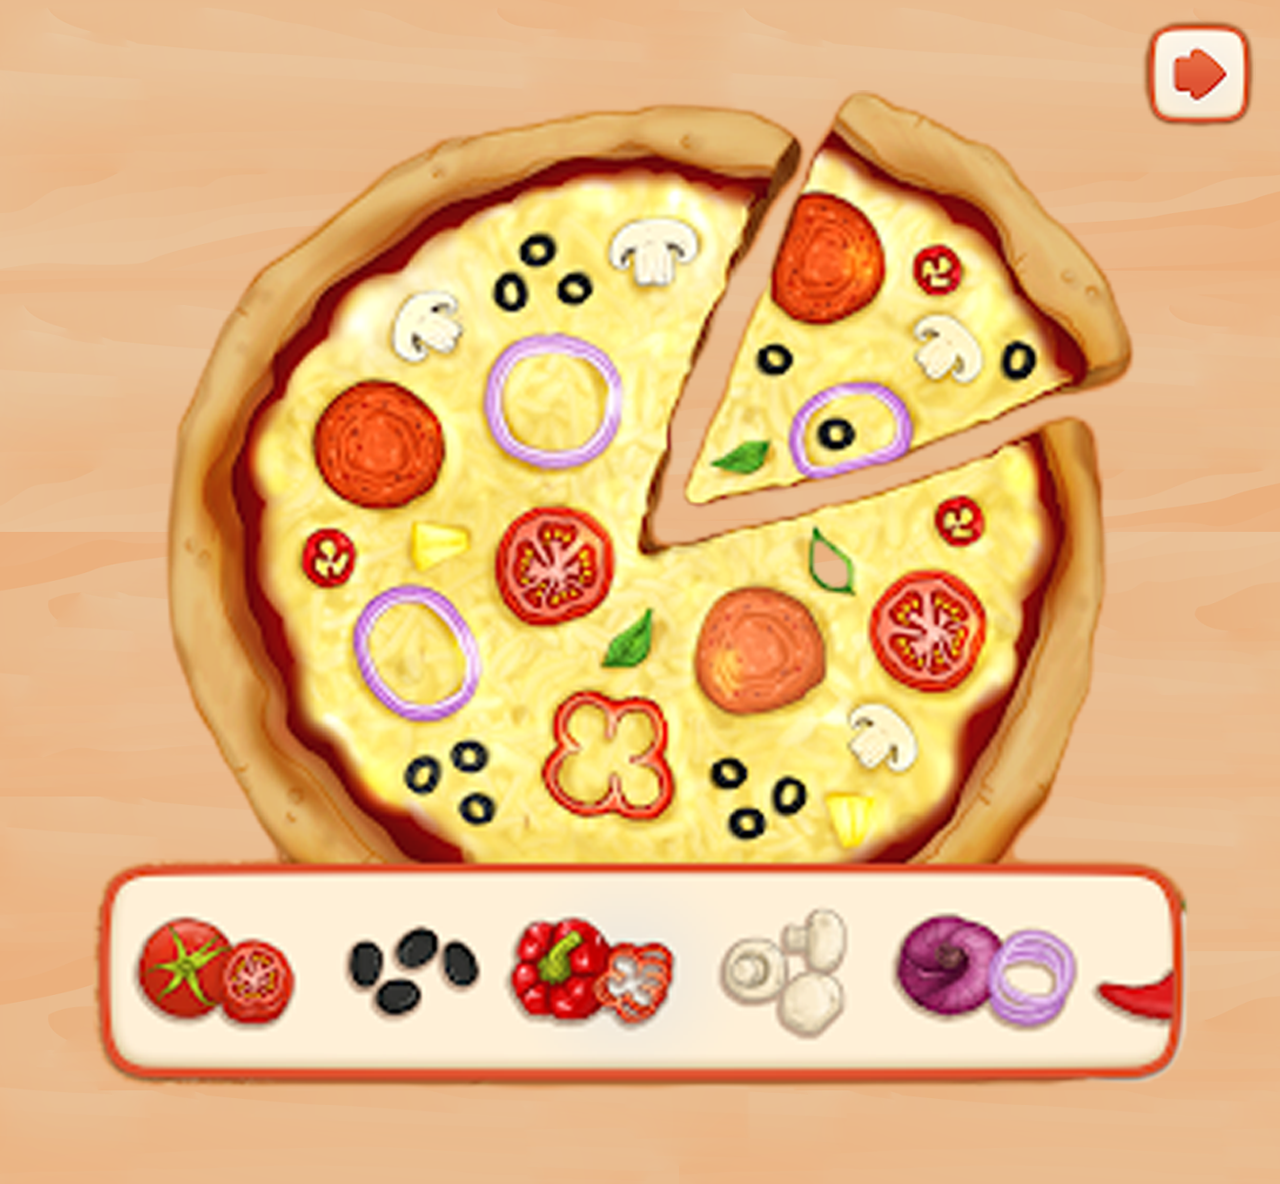 Free Papas Pizzeria To Go perfect APK Download For Android